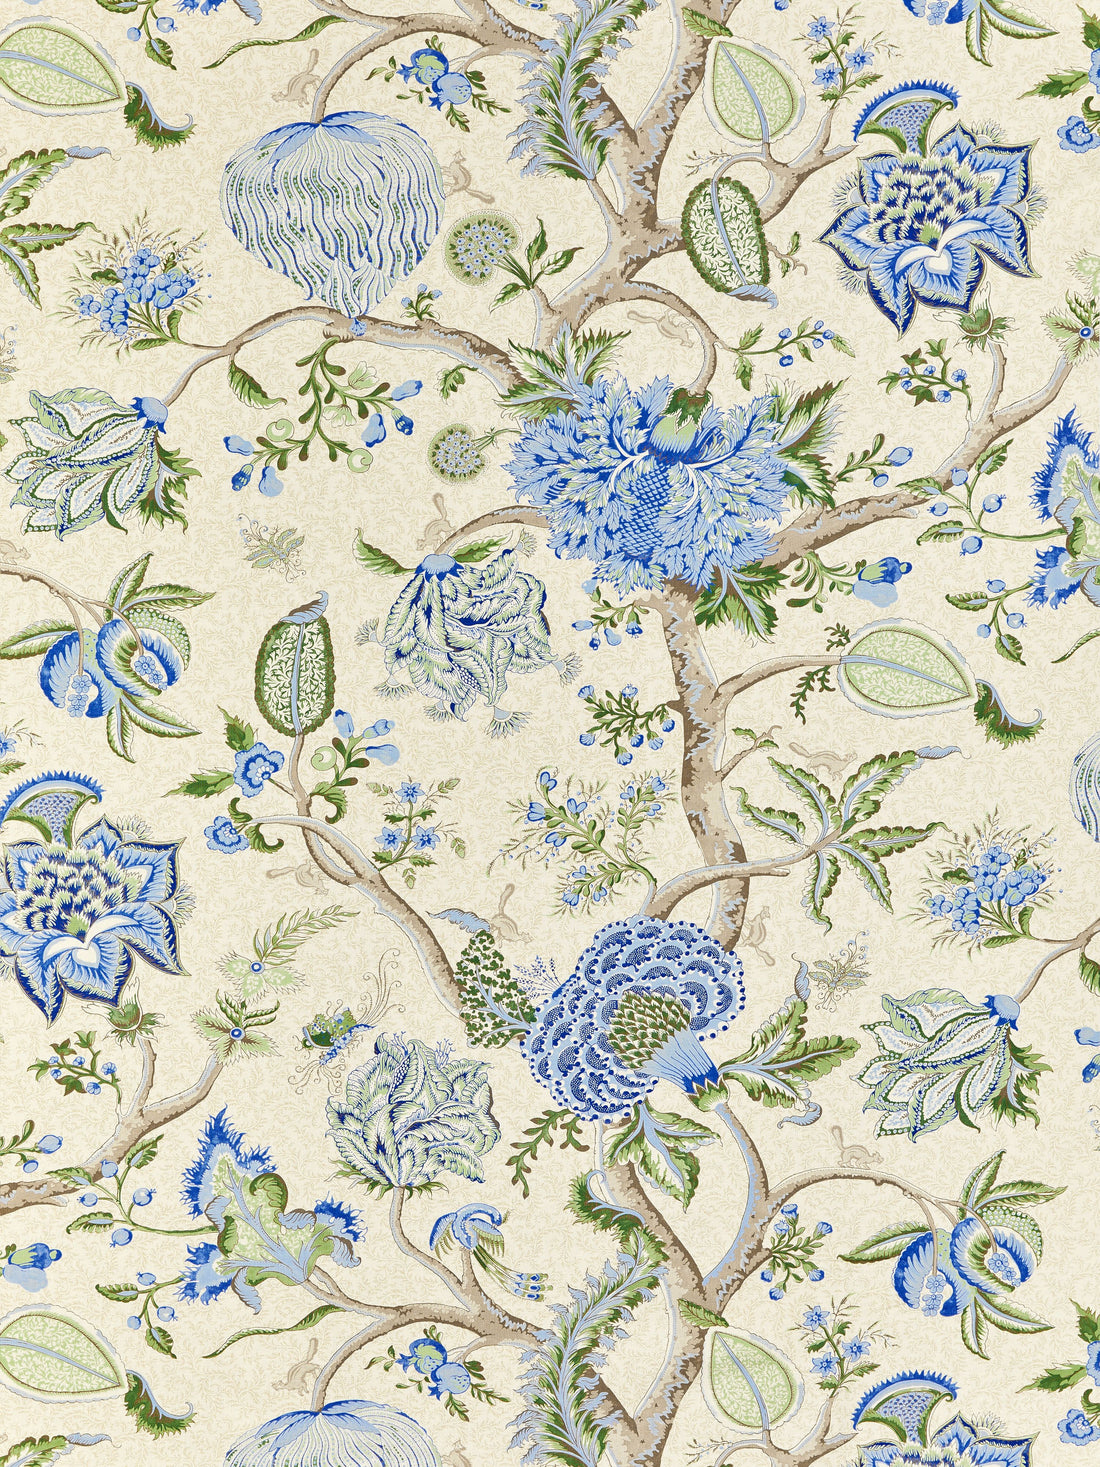 Pondicherry Cotton Print fabric in blue, green on cream color - pattern number SC 000316430 - by Scalamandre in the Scalamandre Fabrics Book 1 collection